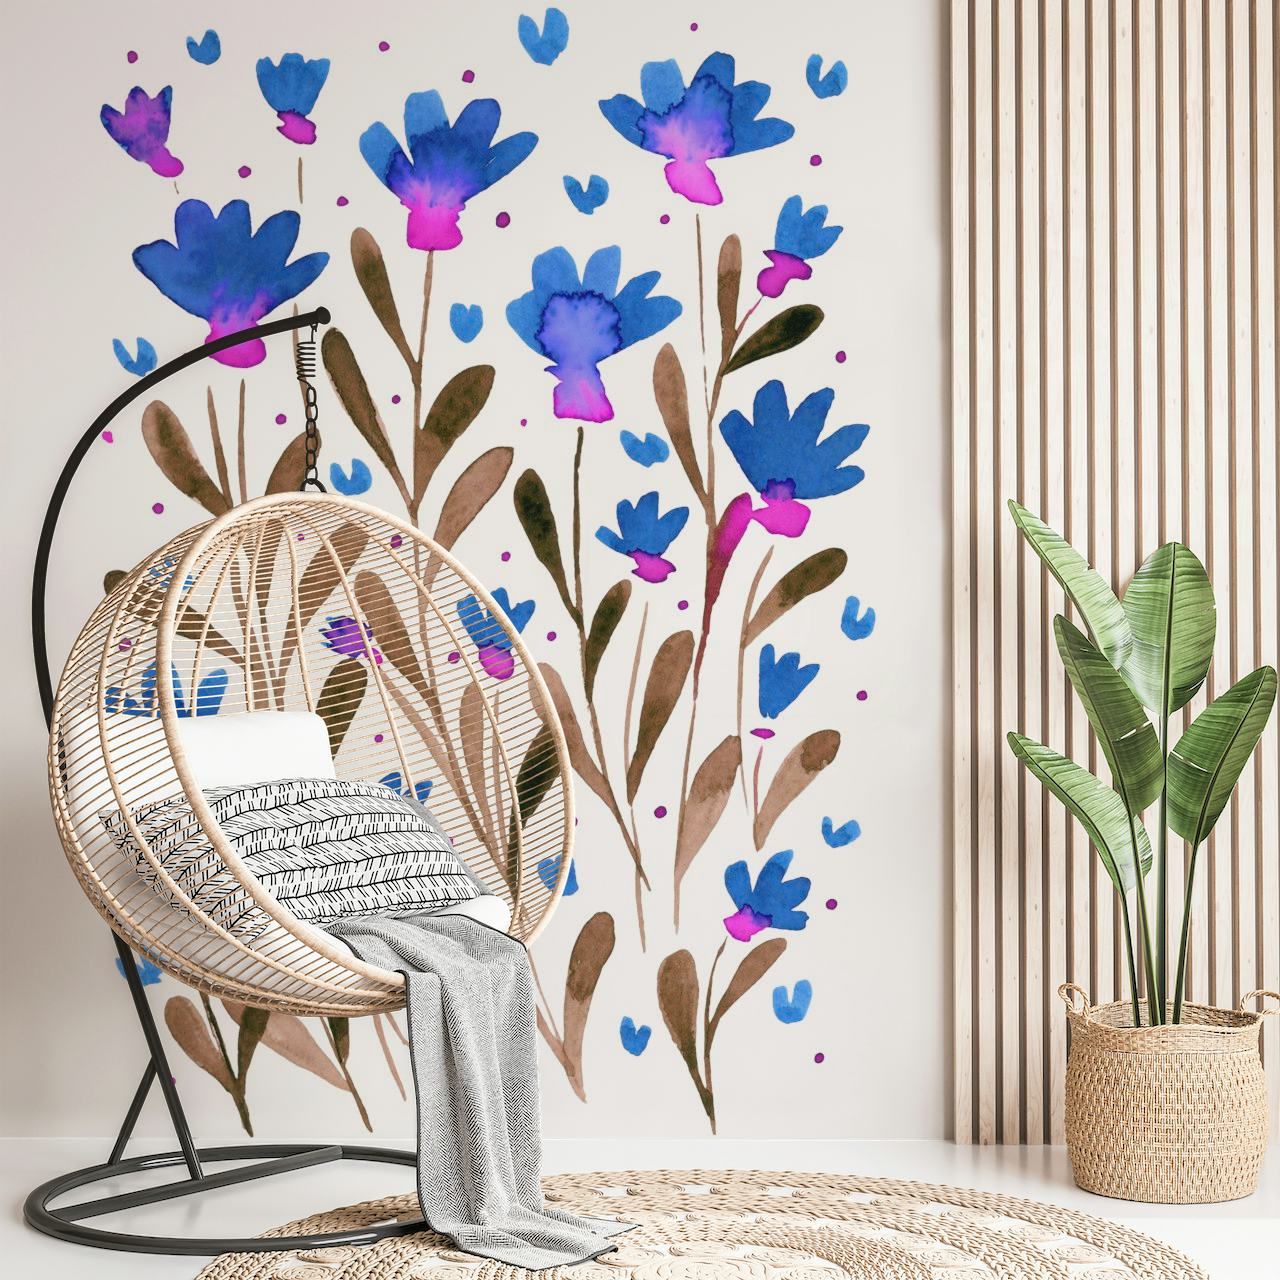 Forget me not flowers - blue and pink tapeta